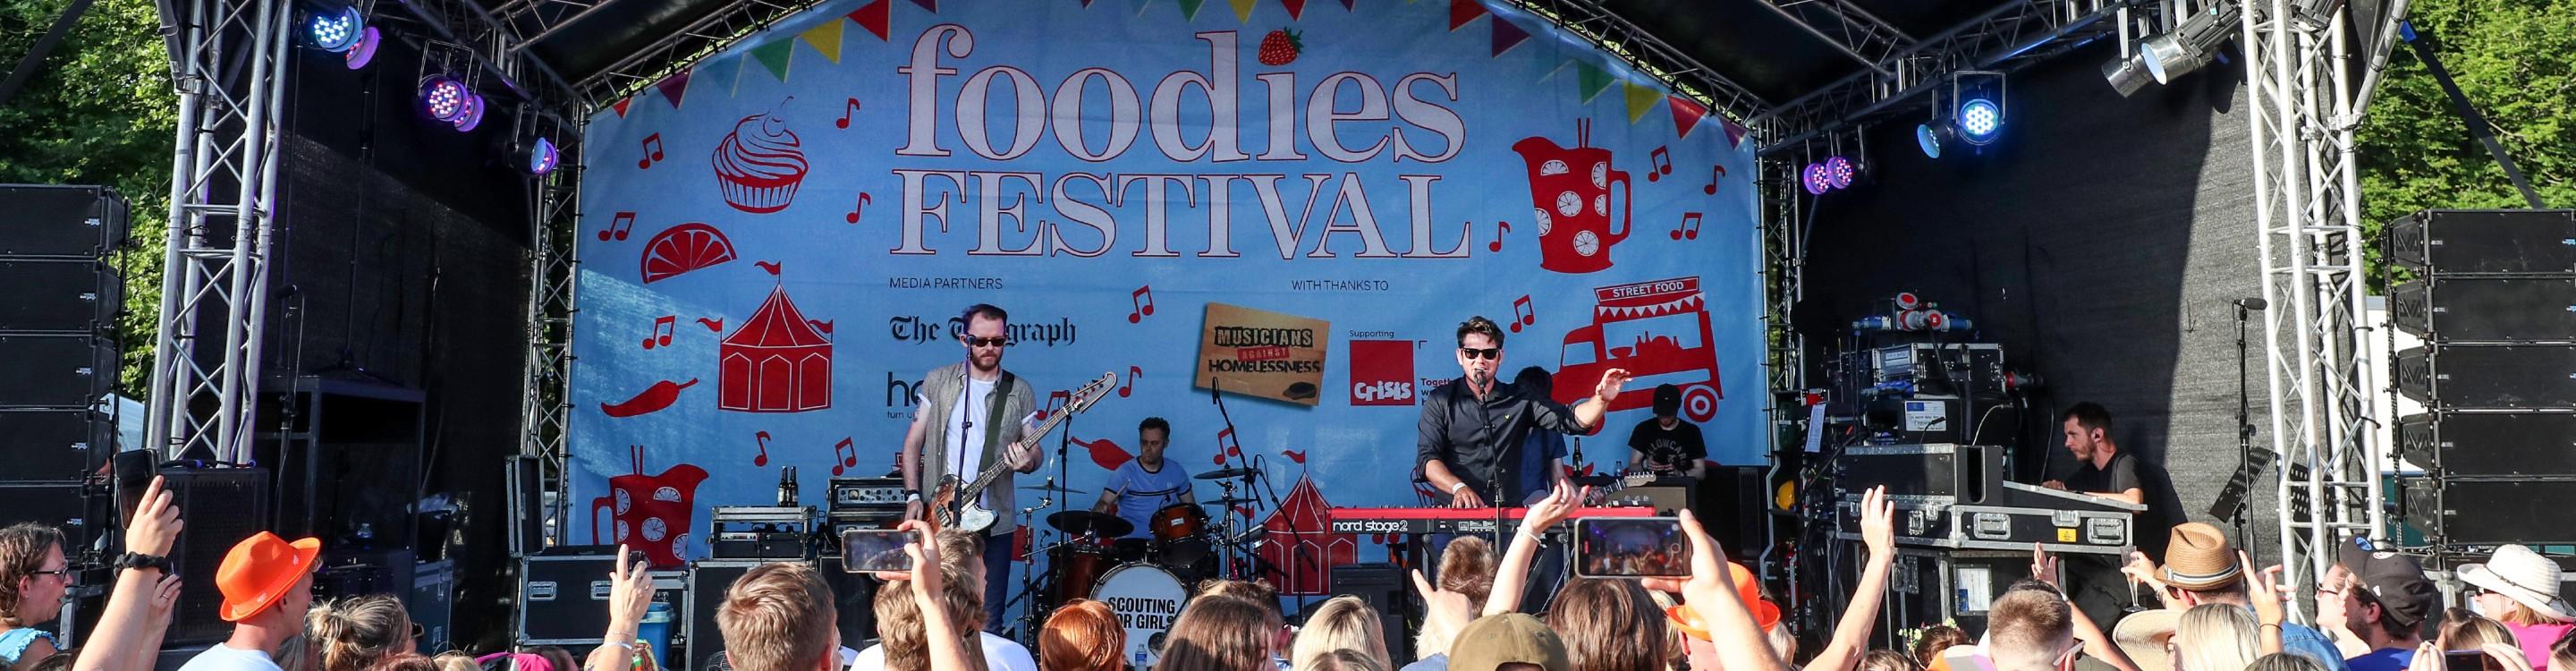 Photo of a band playing to audience on stage at Foodies Festival 